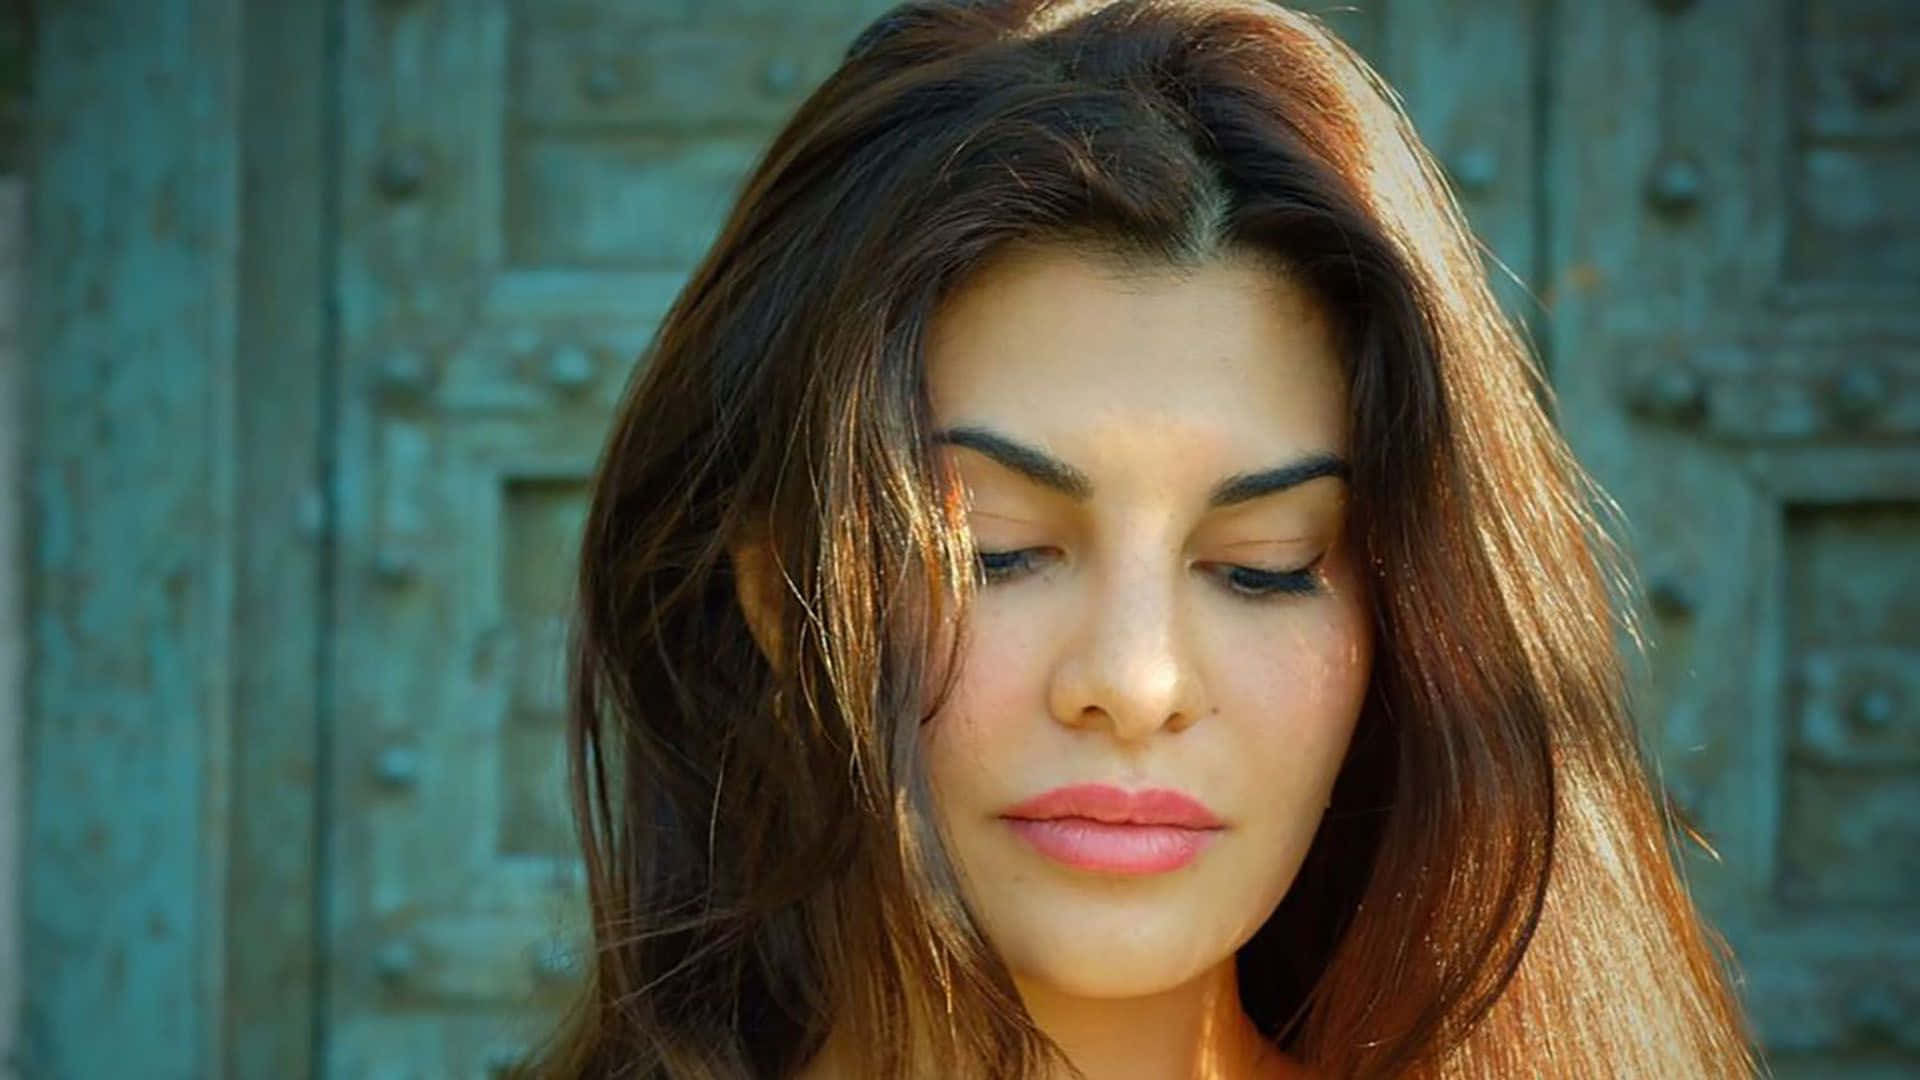 Jacqueline Fernandez, The Actress Who Lights Up The Big Screen